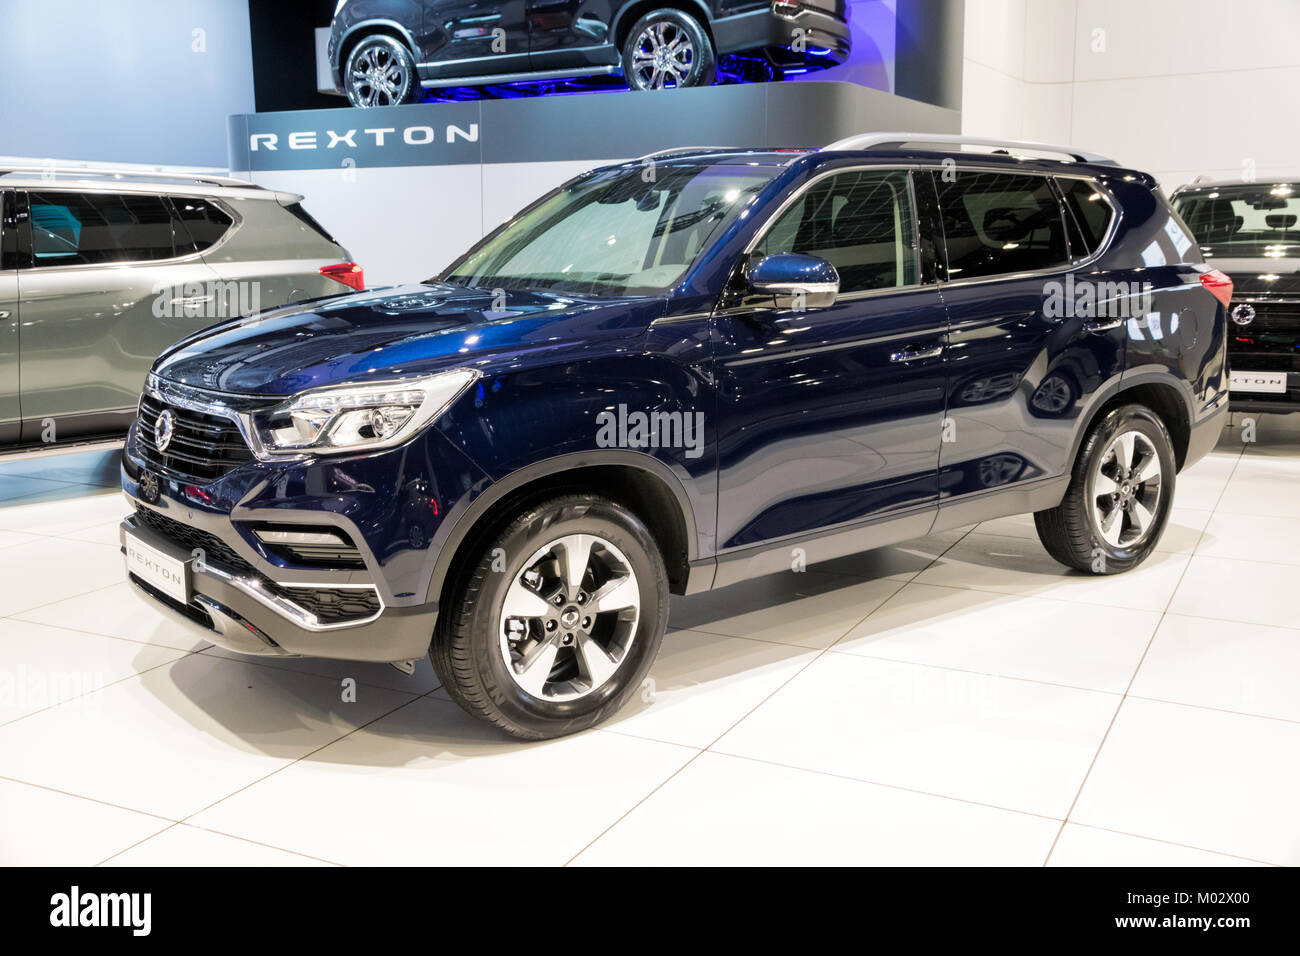 BRUSSELS - JAN 10, 2018: New 2018 SsangYong Rexton mid-size SUV car showcased at the Brussels Motor Show. Stock Photo